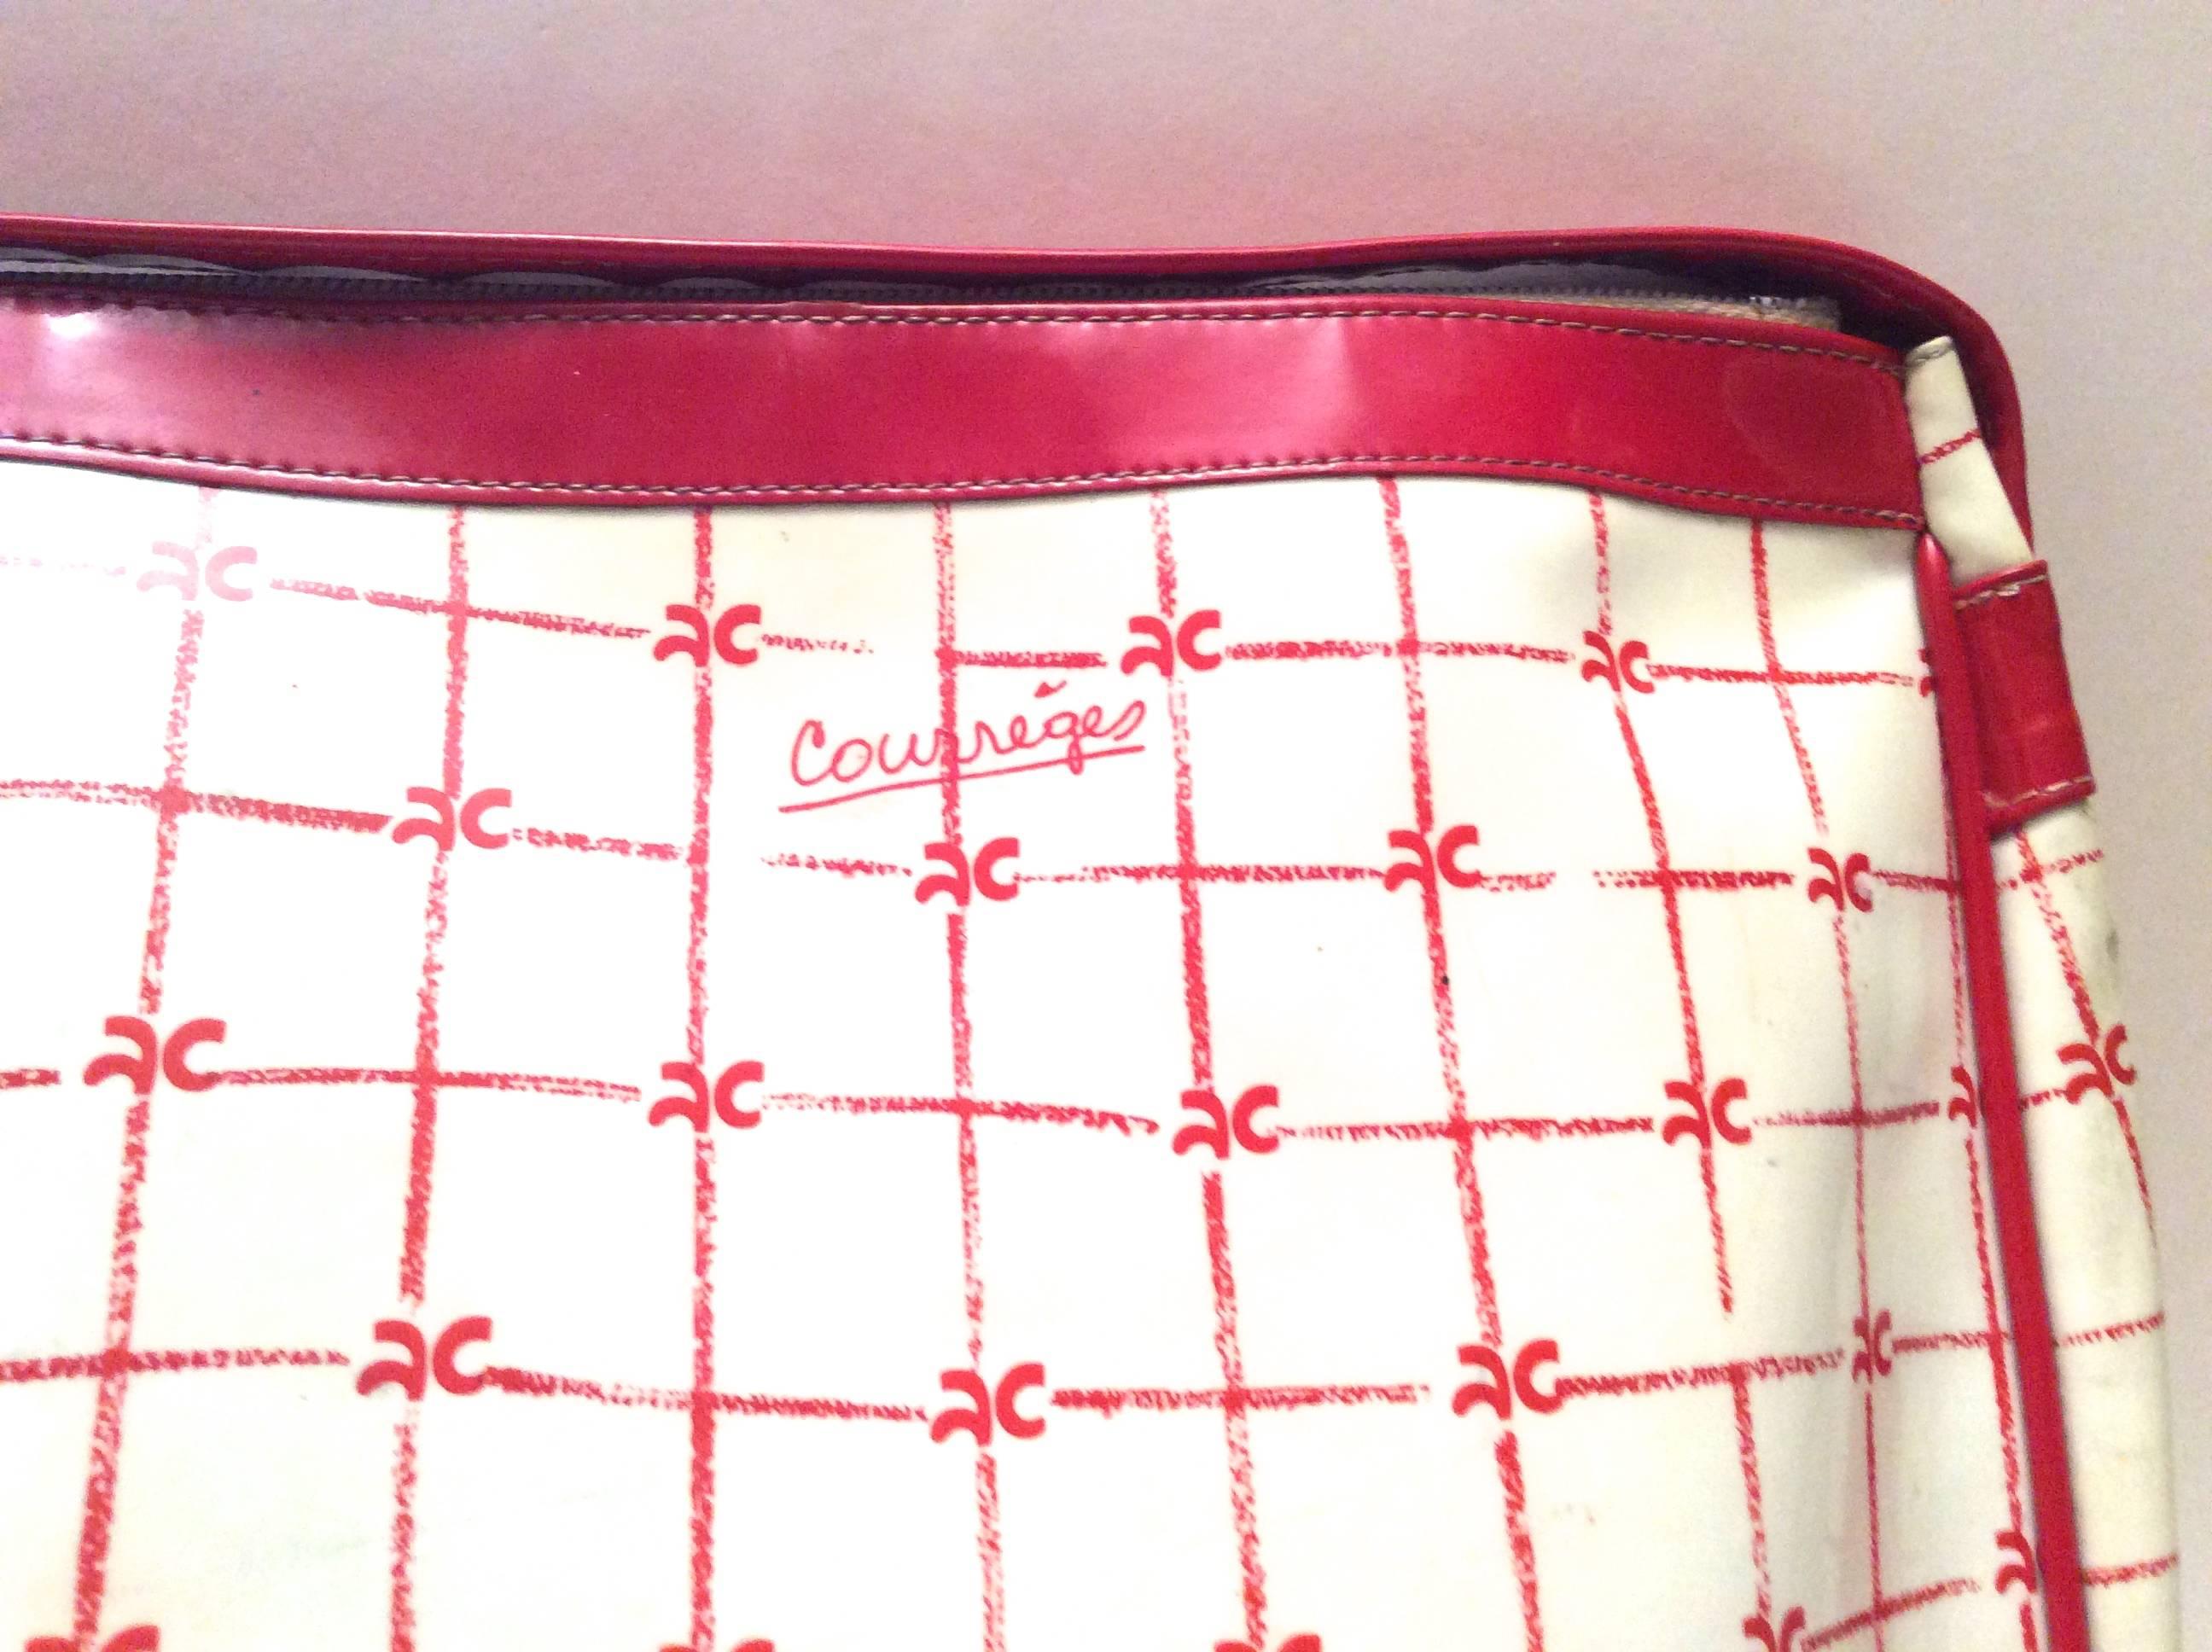 Rare 1970's Courreges Purse - White and Red  For Sale 2